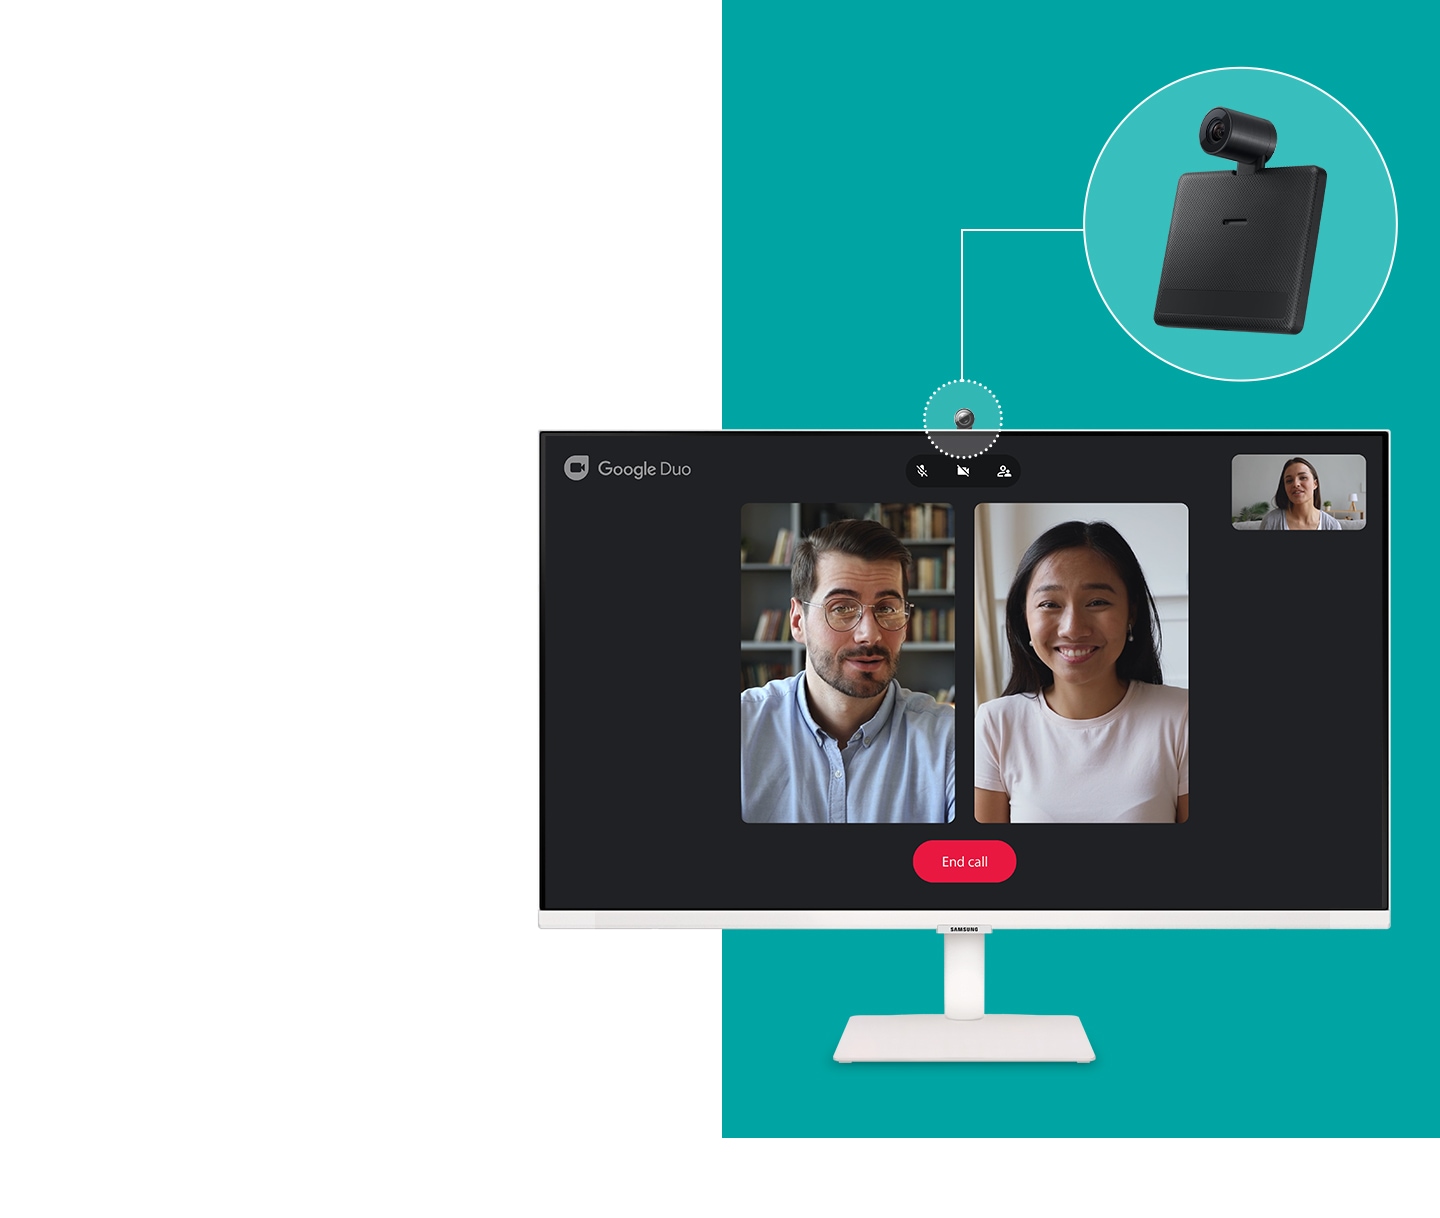 The monitor now has a circular camera attached to its top. On the screen shows the interface of the Google Duo chat application with three other users participating in a video call.